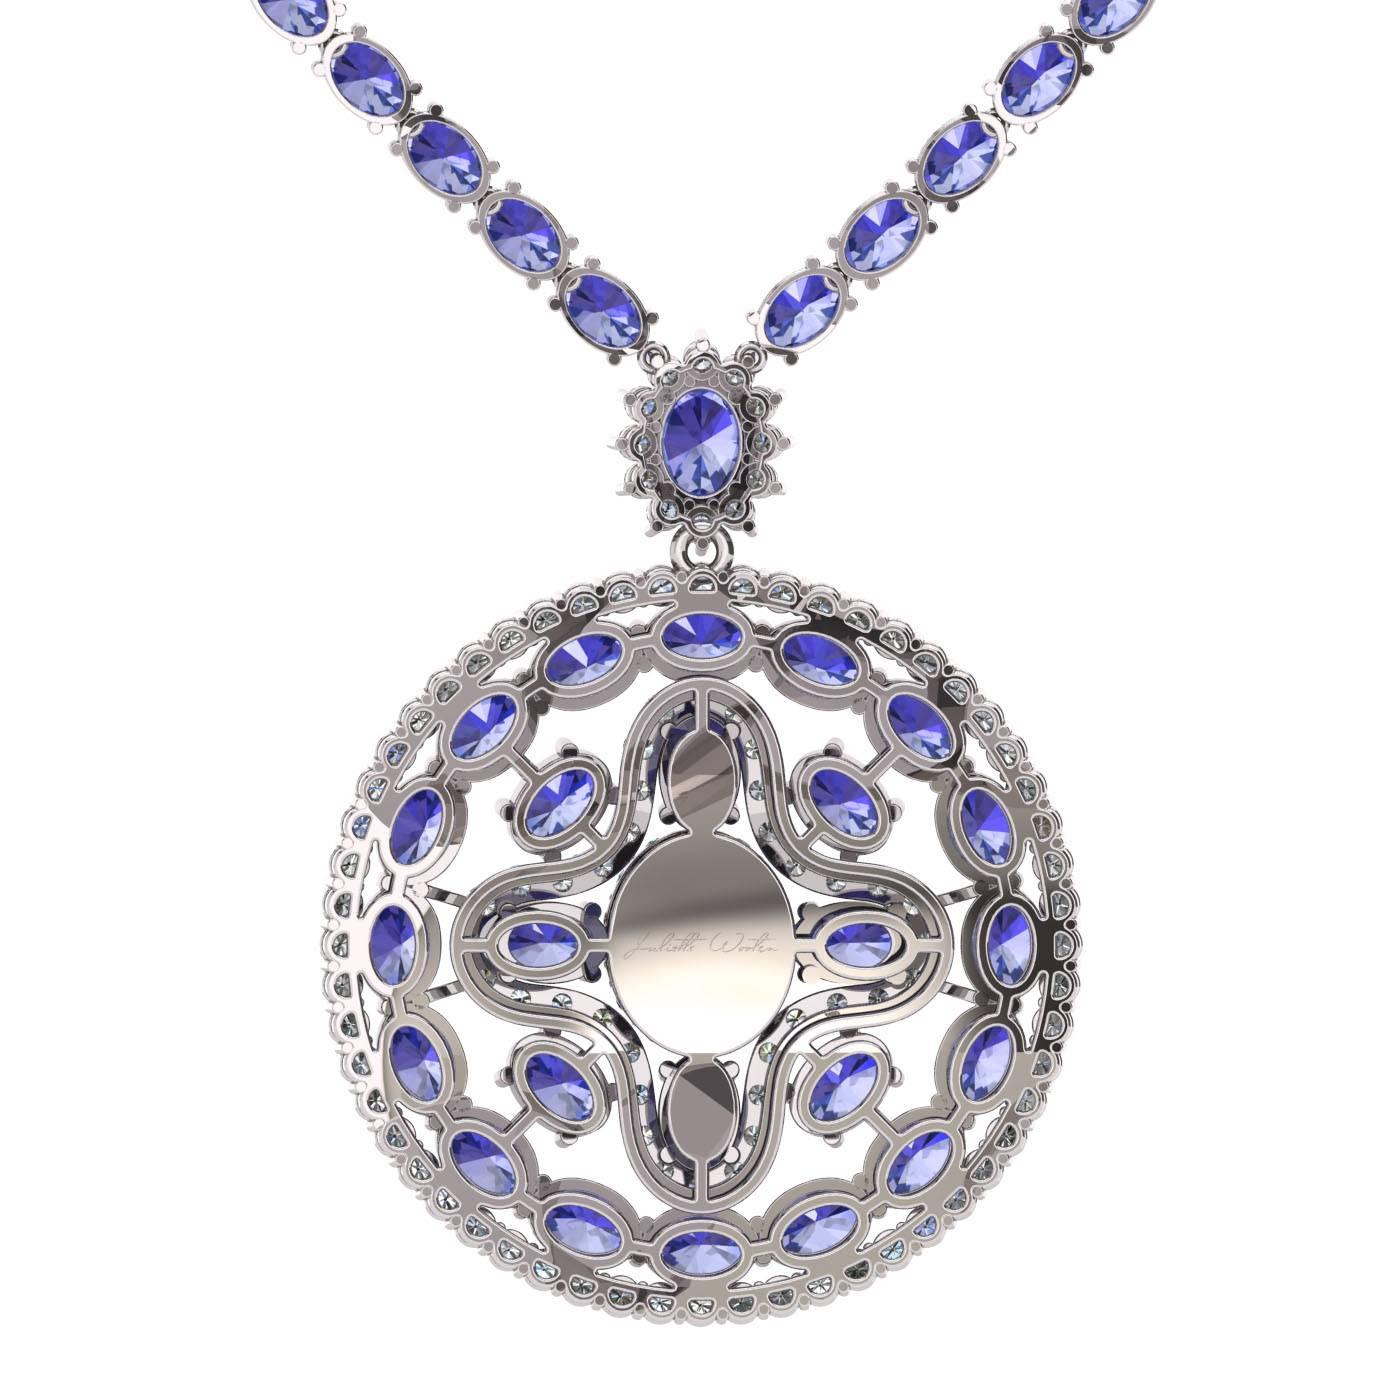 INTRODUCING NEW COLLECTION LE CERCLE PARFAIT

Beautiful and rare! Tanzanite is one of the most amazing and mystical gem of of the world. Tanzanite’s gorgeous color is a captivating mix of blue and purple. It is symbolizing life, power and balance.